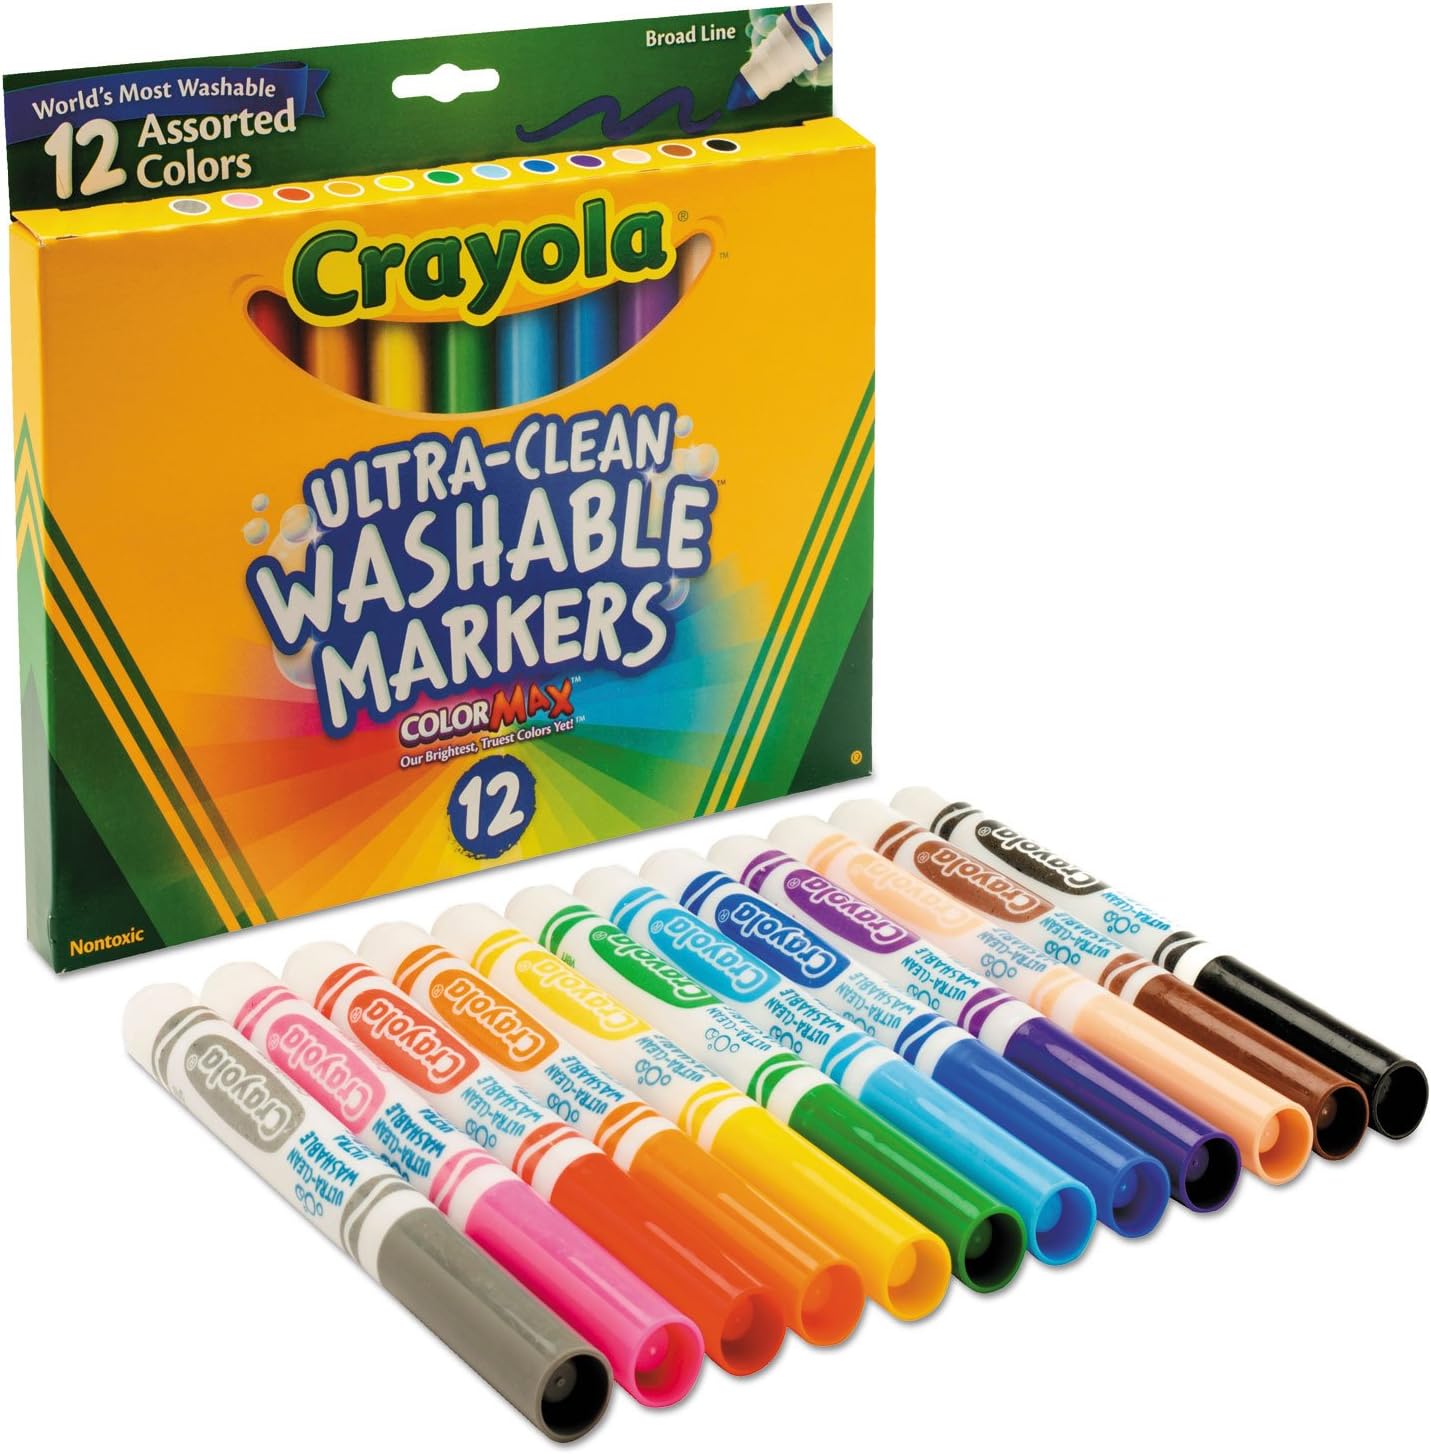 Crayola Ultra-Clean Broad Line Washable Markers